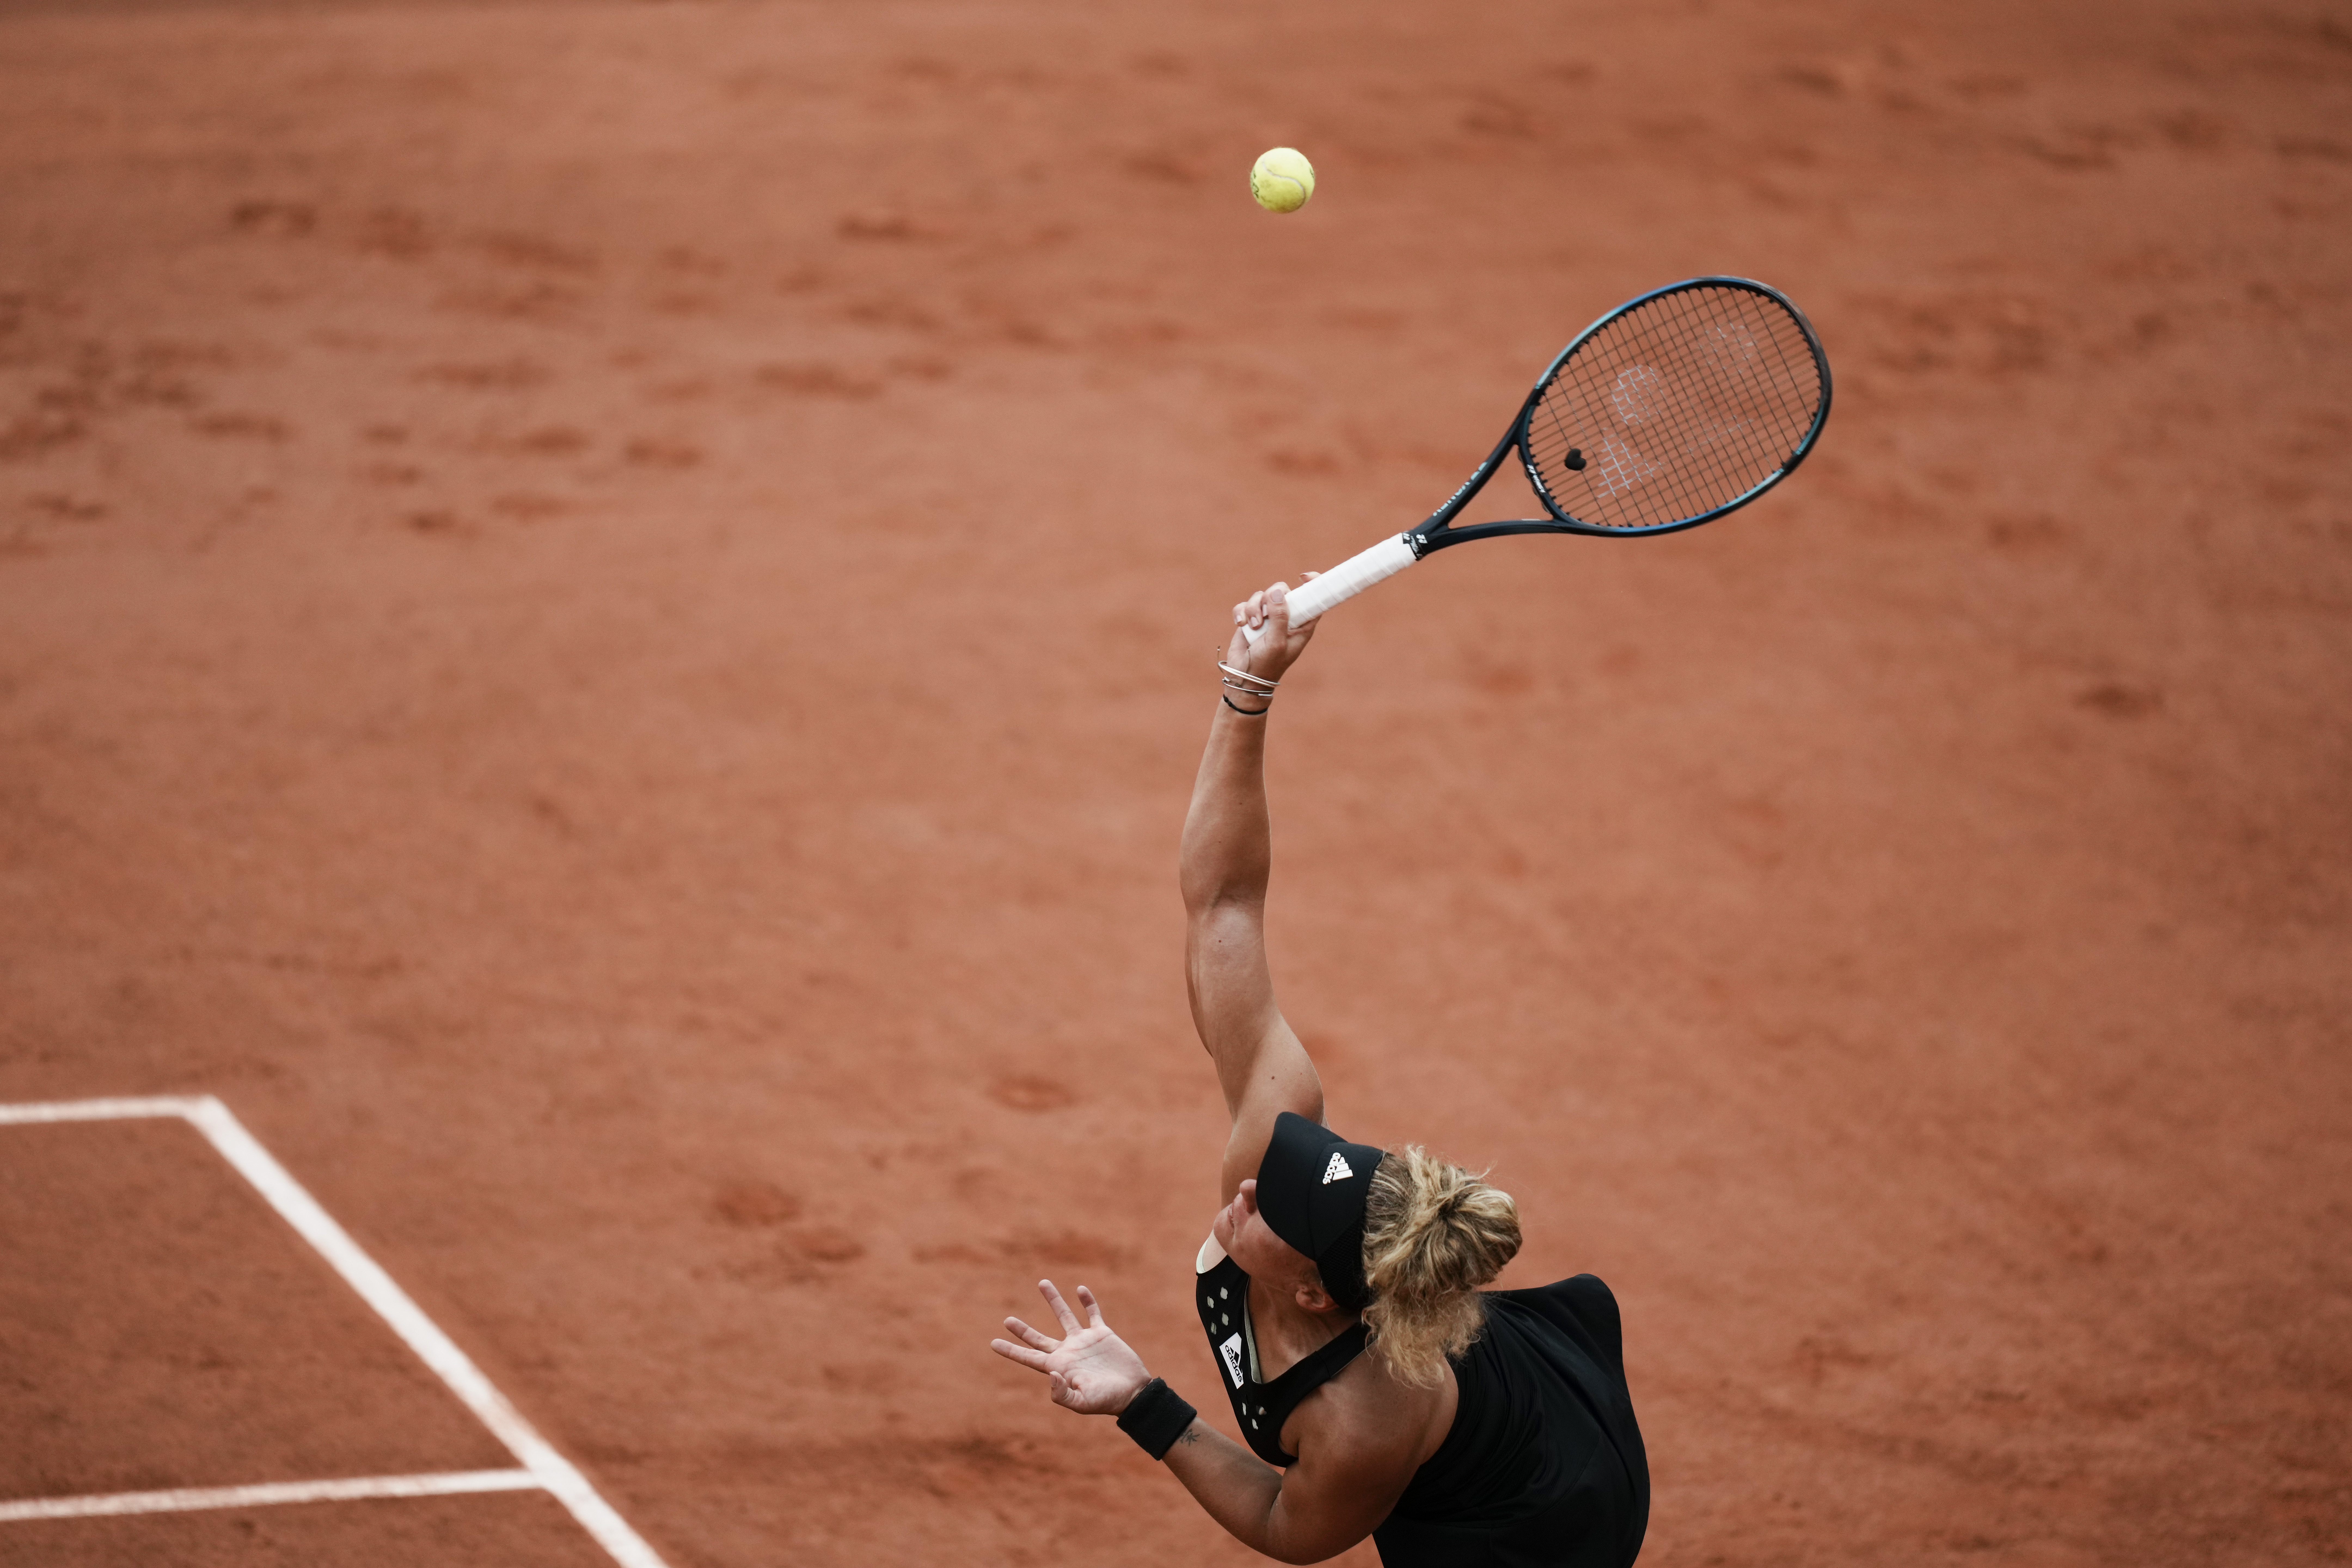 How to watch French Open 2022 Round 3 TV schedule, FREE live stream Dmitri Medvedev, Iga Swiatek, more